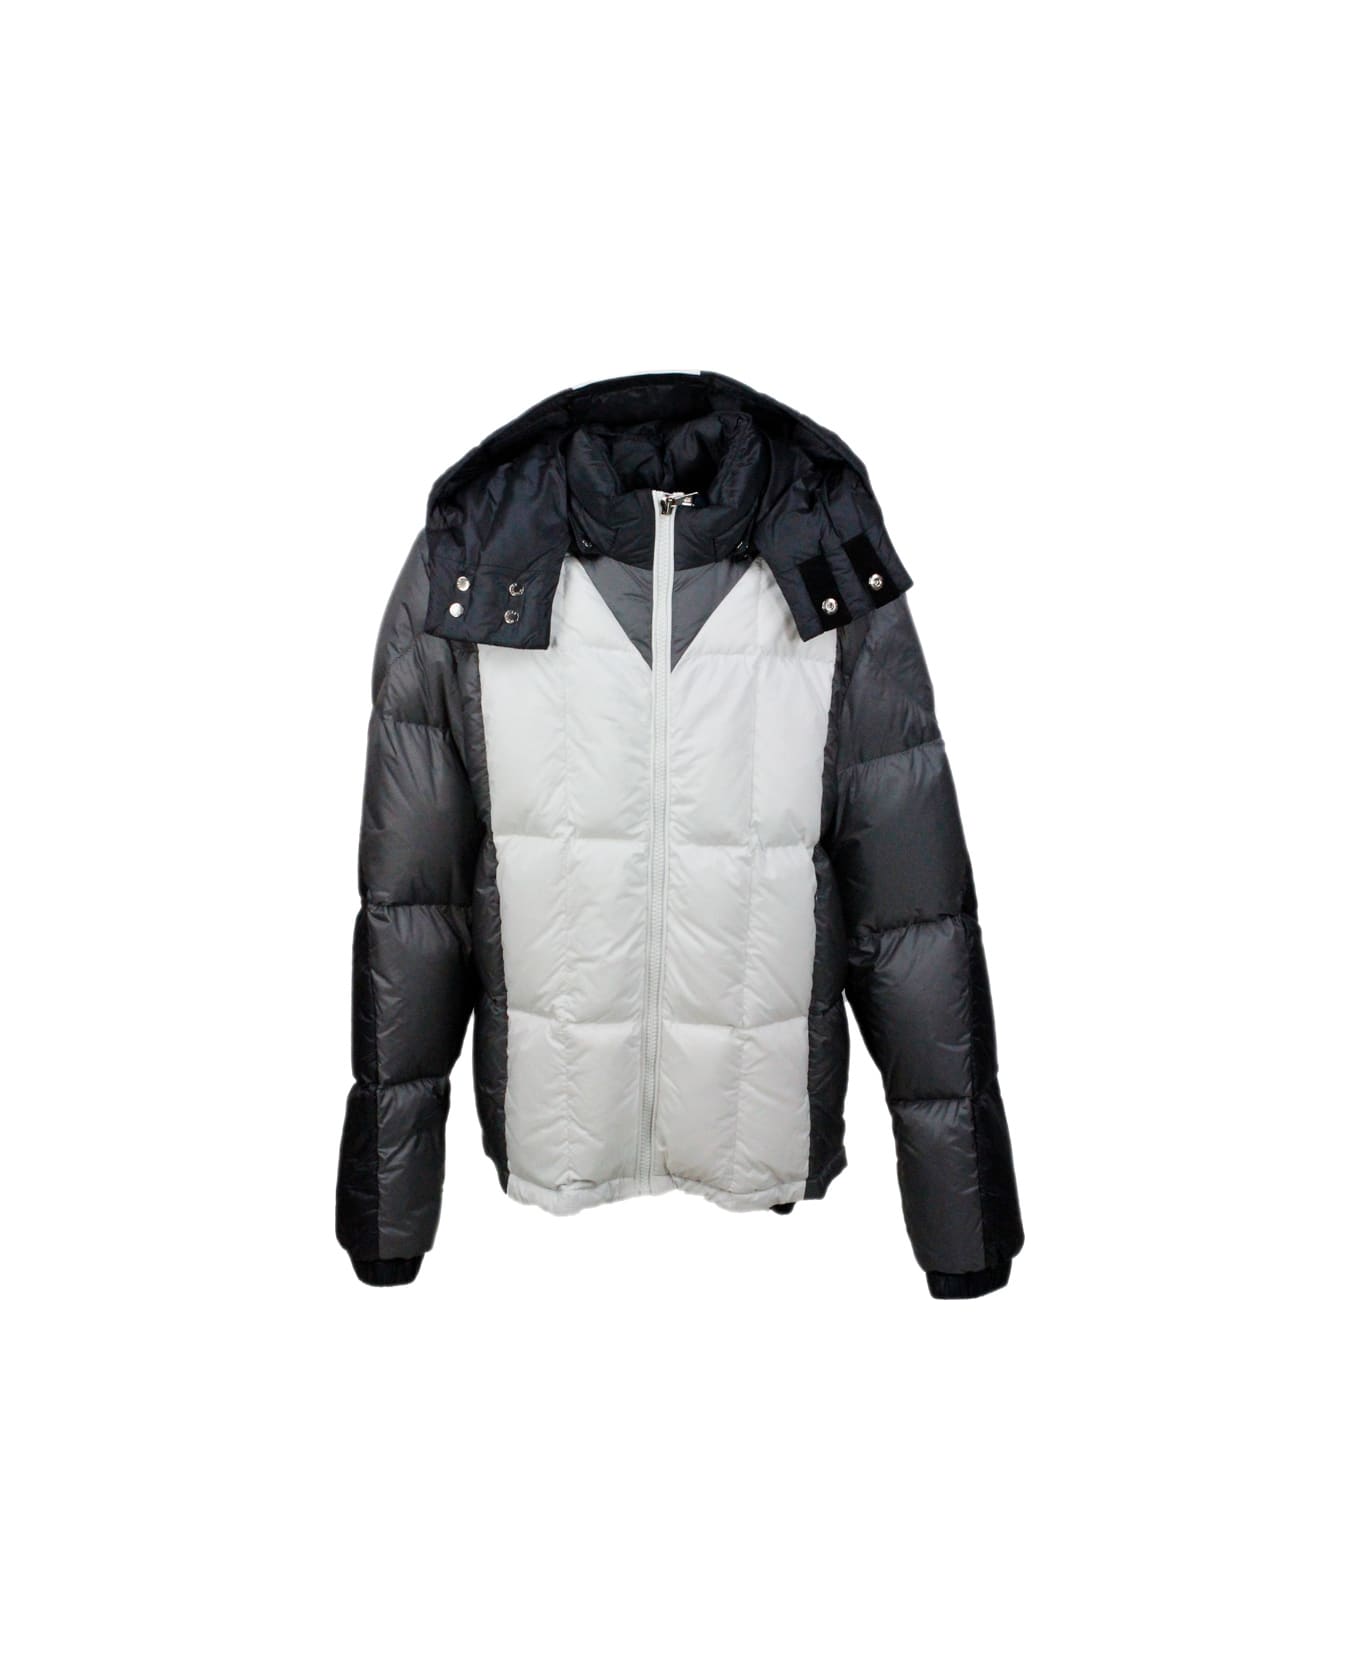 Moncler Down Jacket 100 Grams Alifhotes With Detachable Hood And Writing On The Hood - Grey